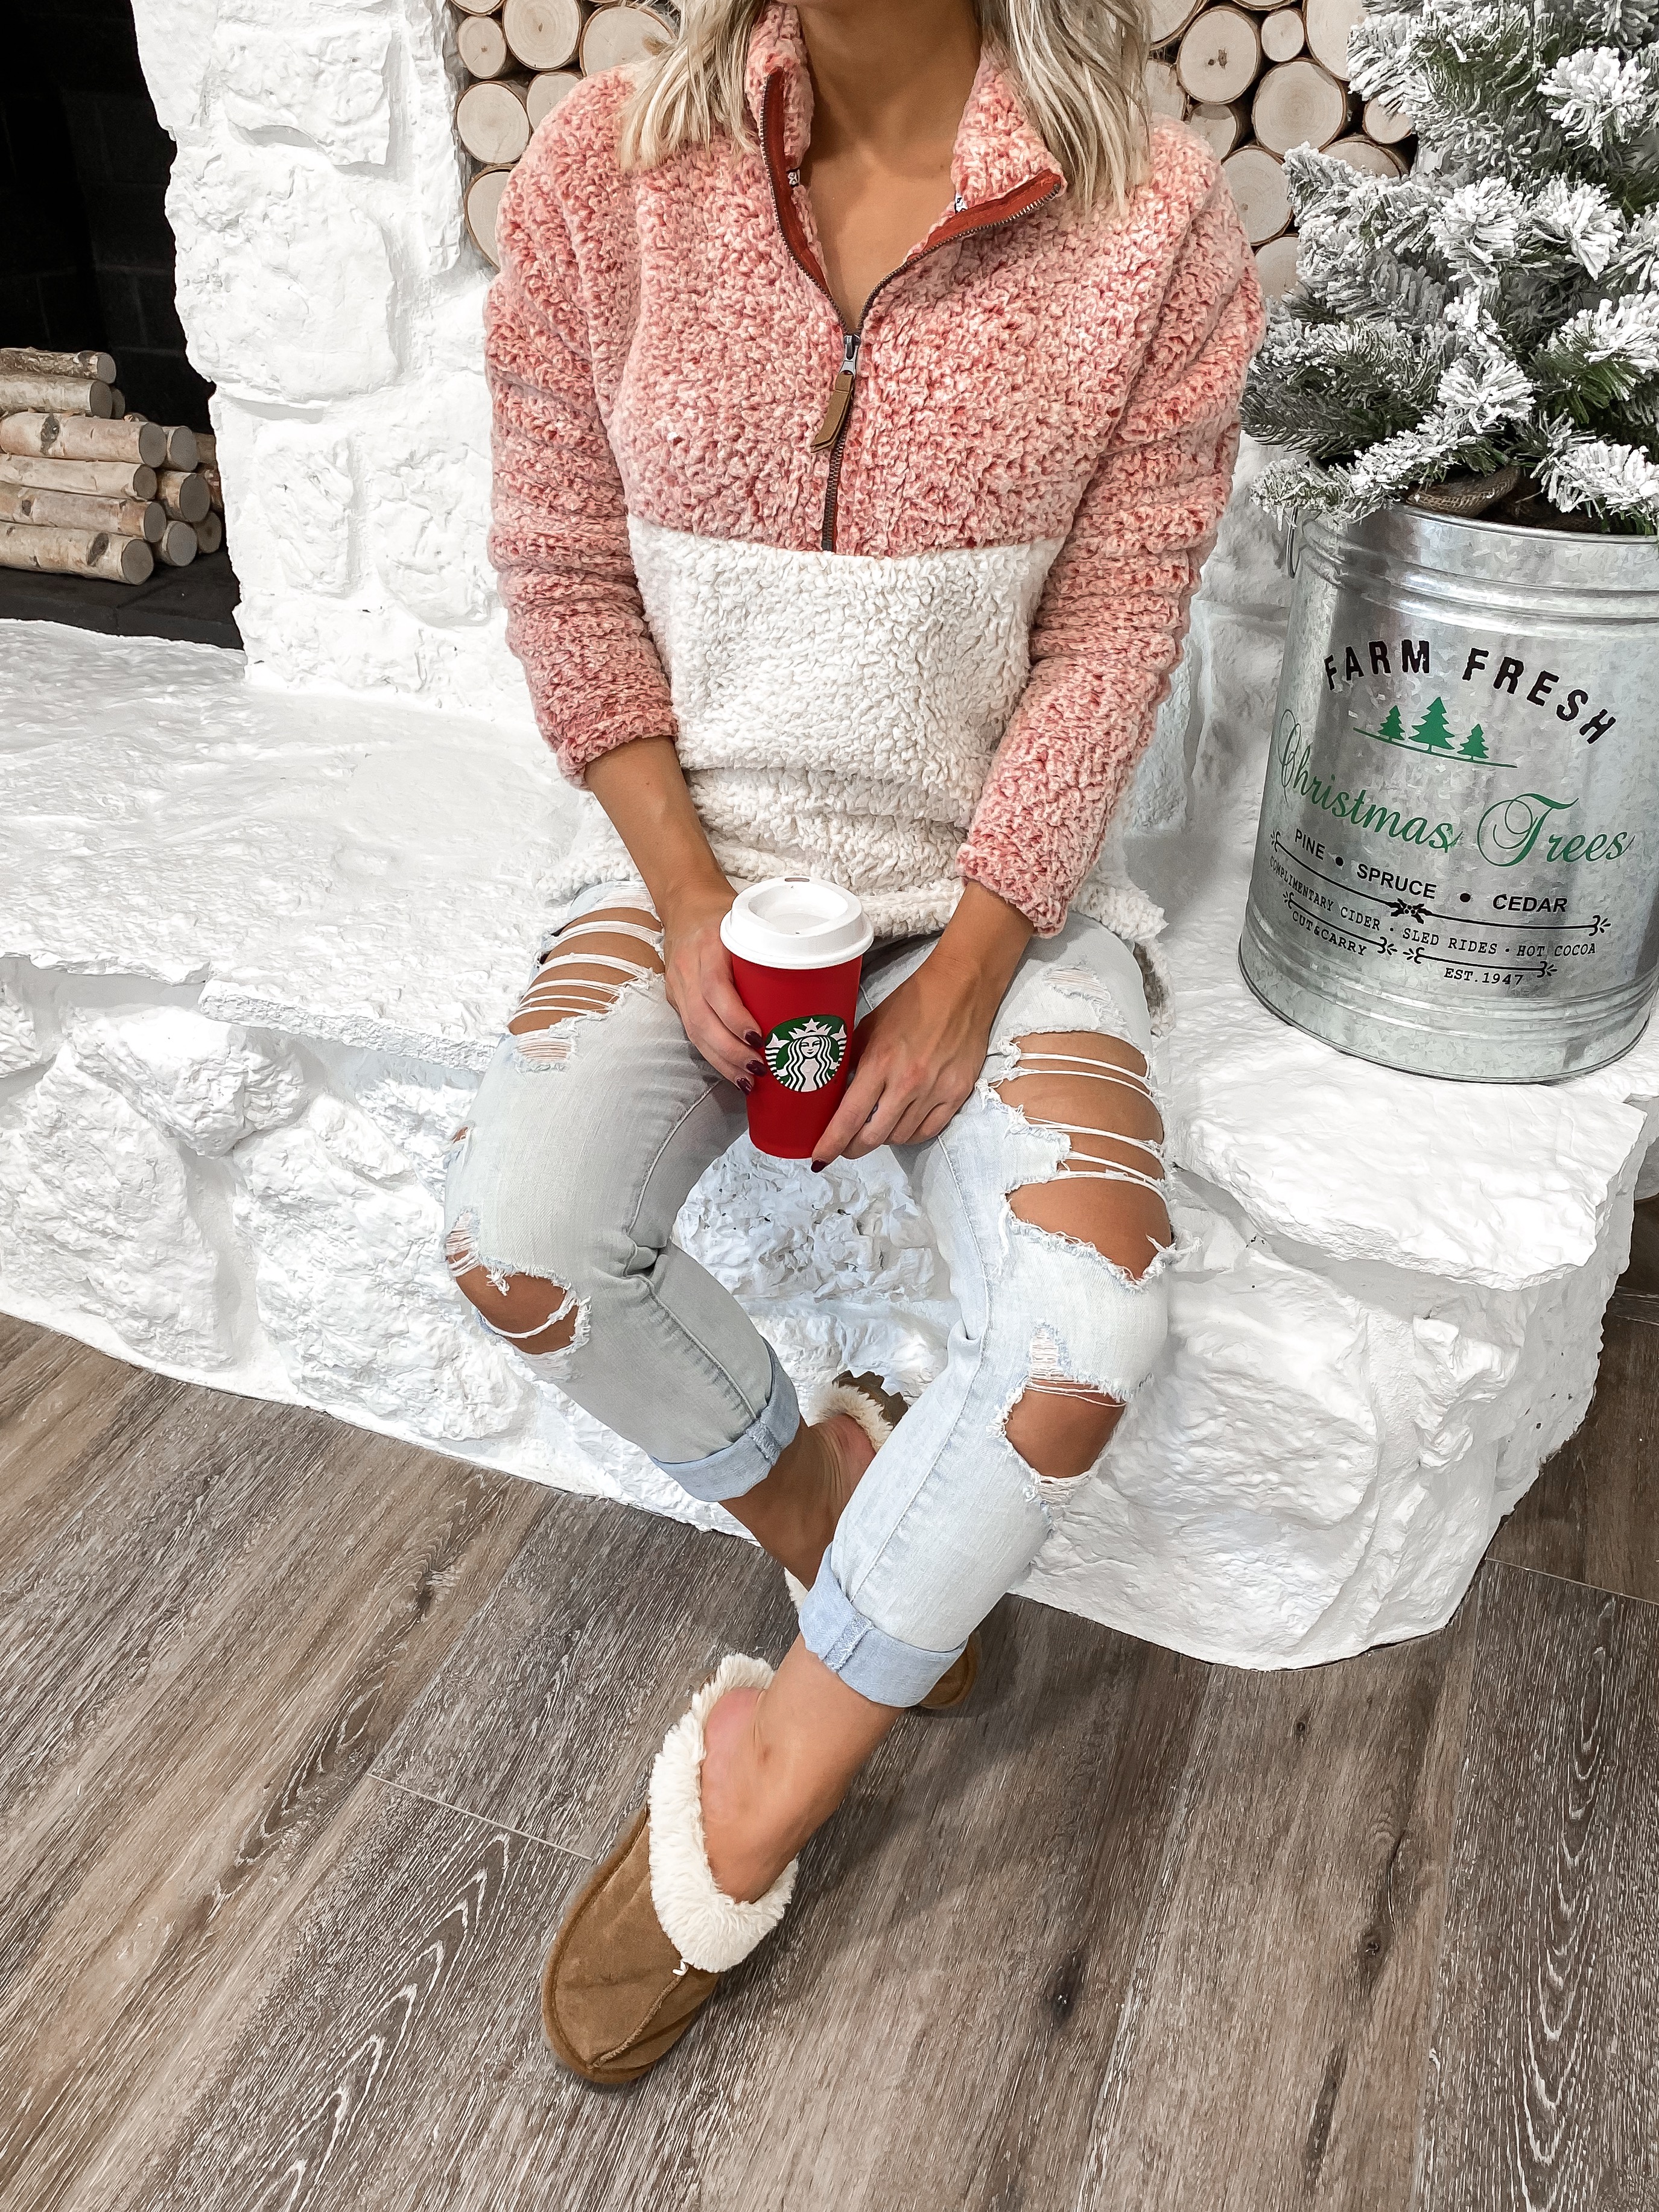 laura beverlin comfy casual outfit under $30 Farmhouse christmas home decor wood stacked fireplace5